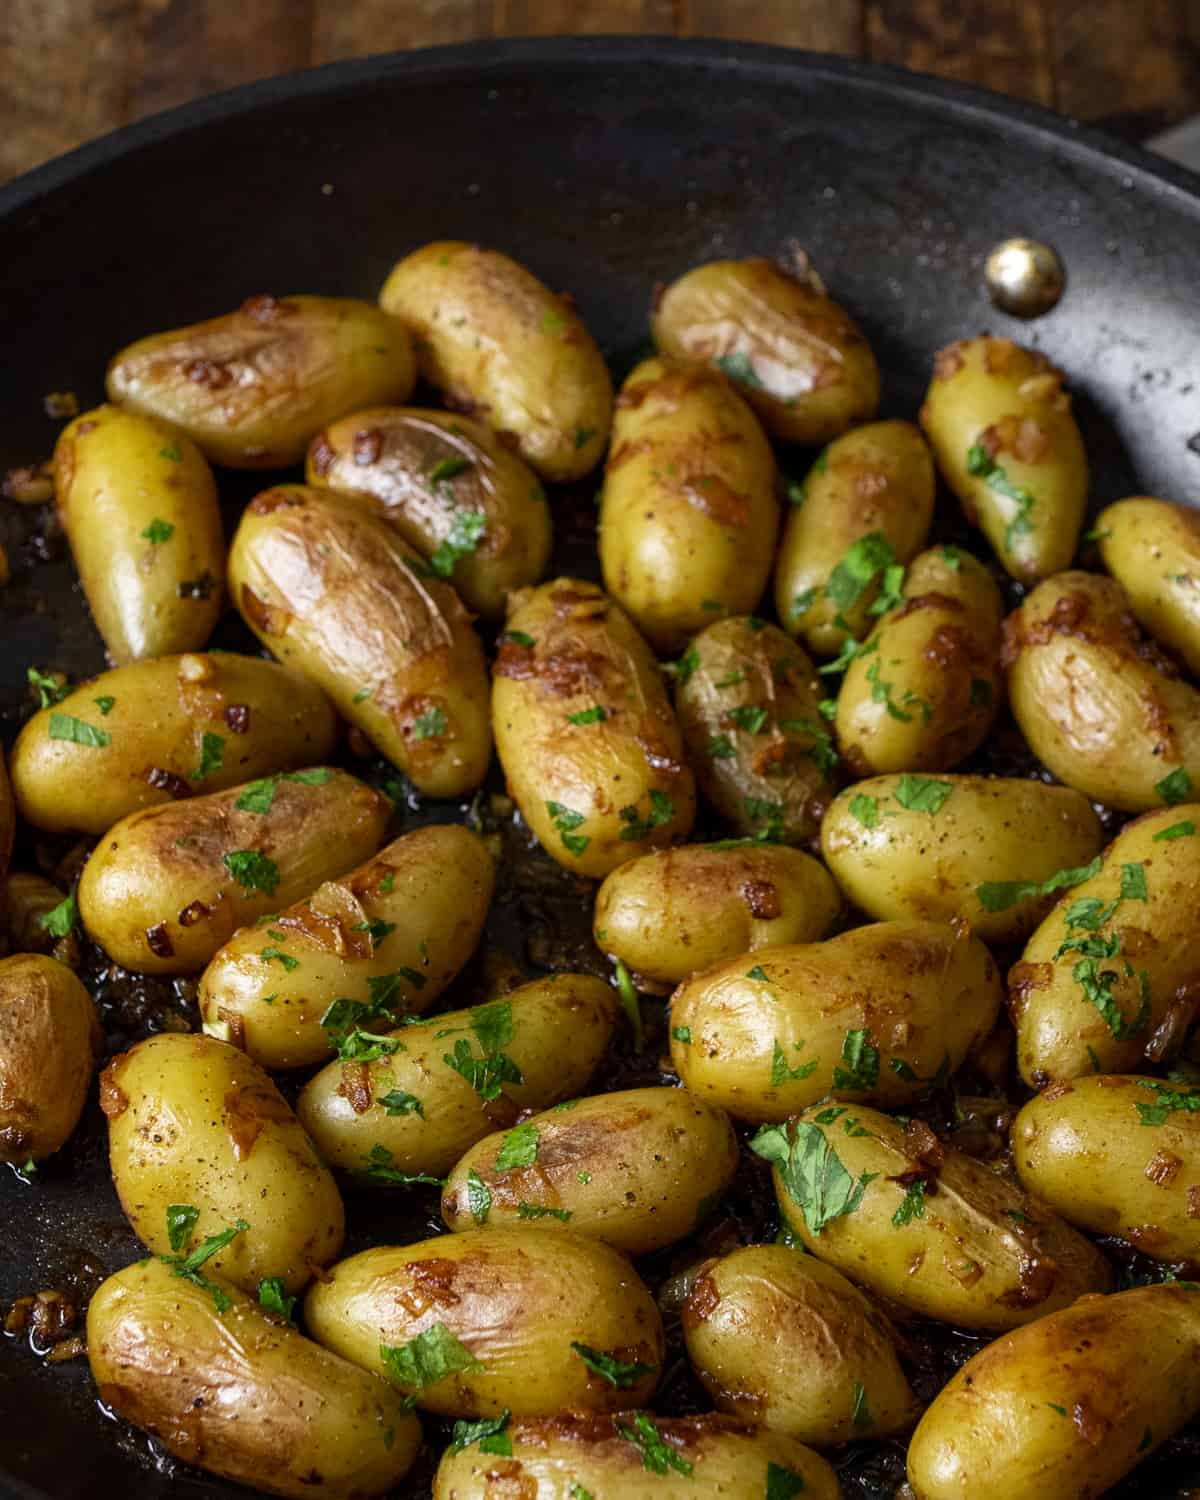 Fresh parsley sprinkled all over the cooked mini potatoes.